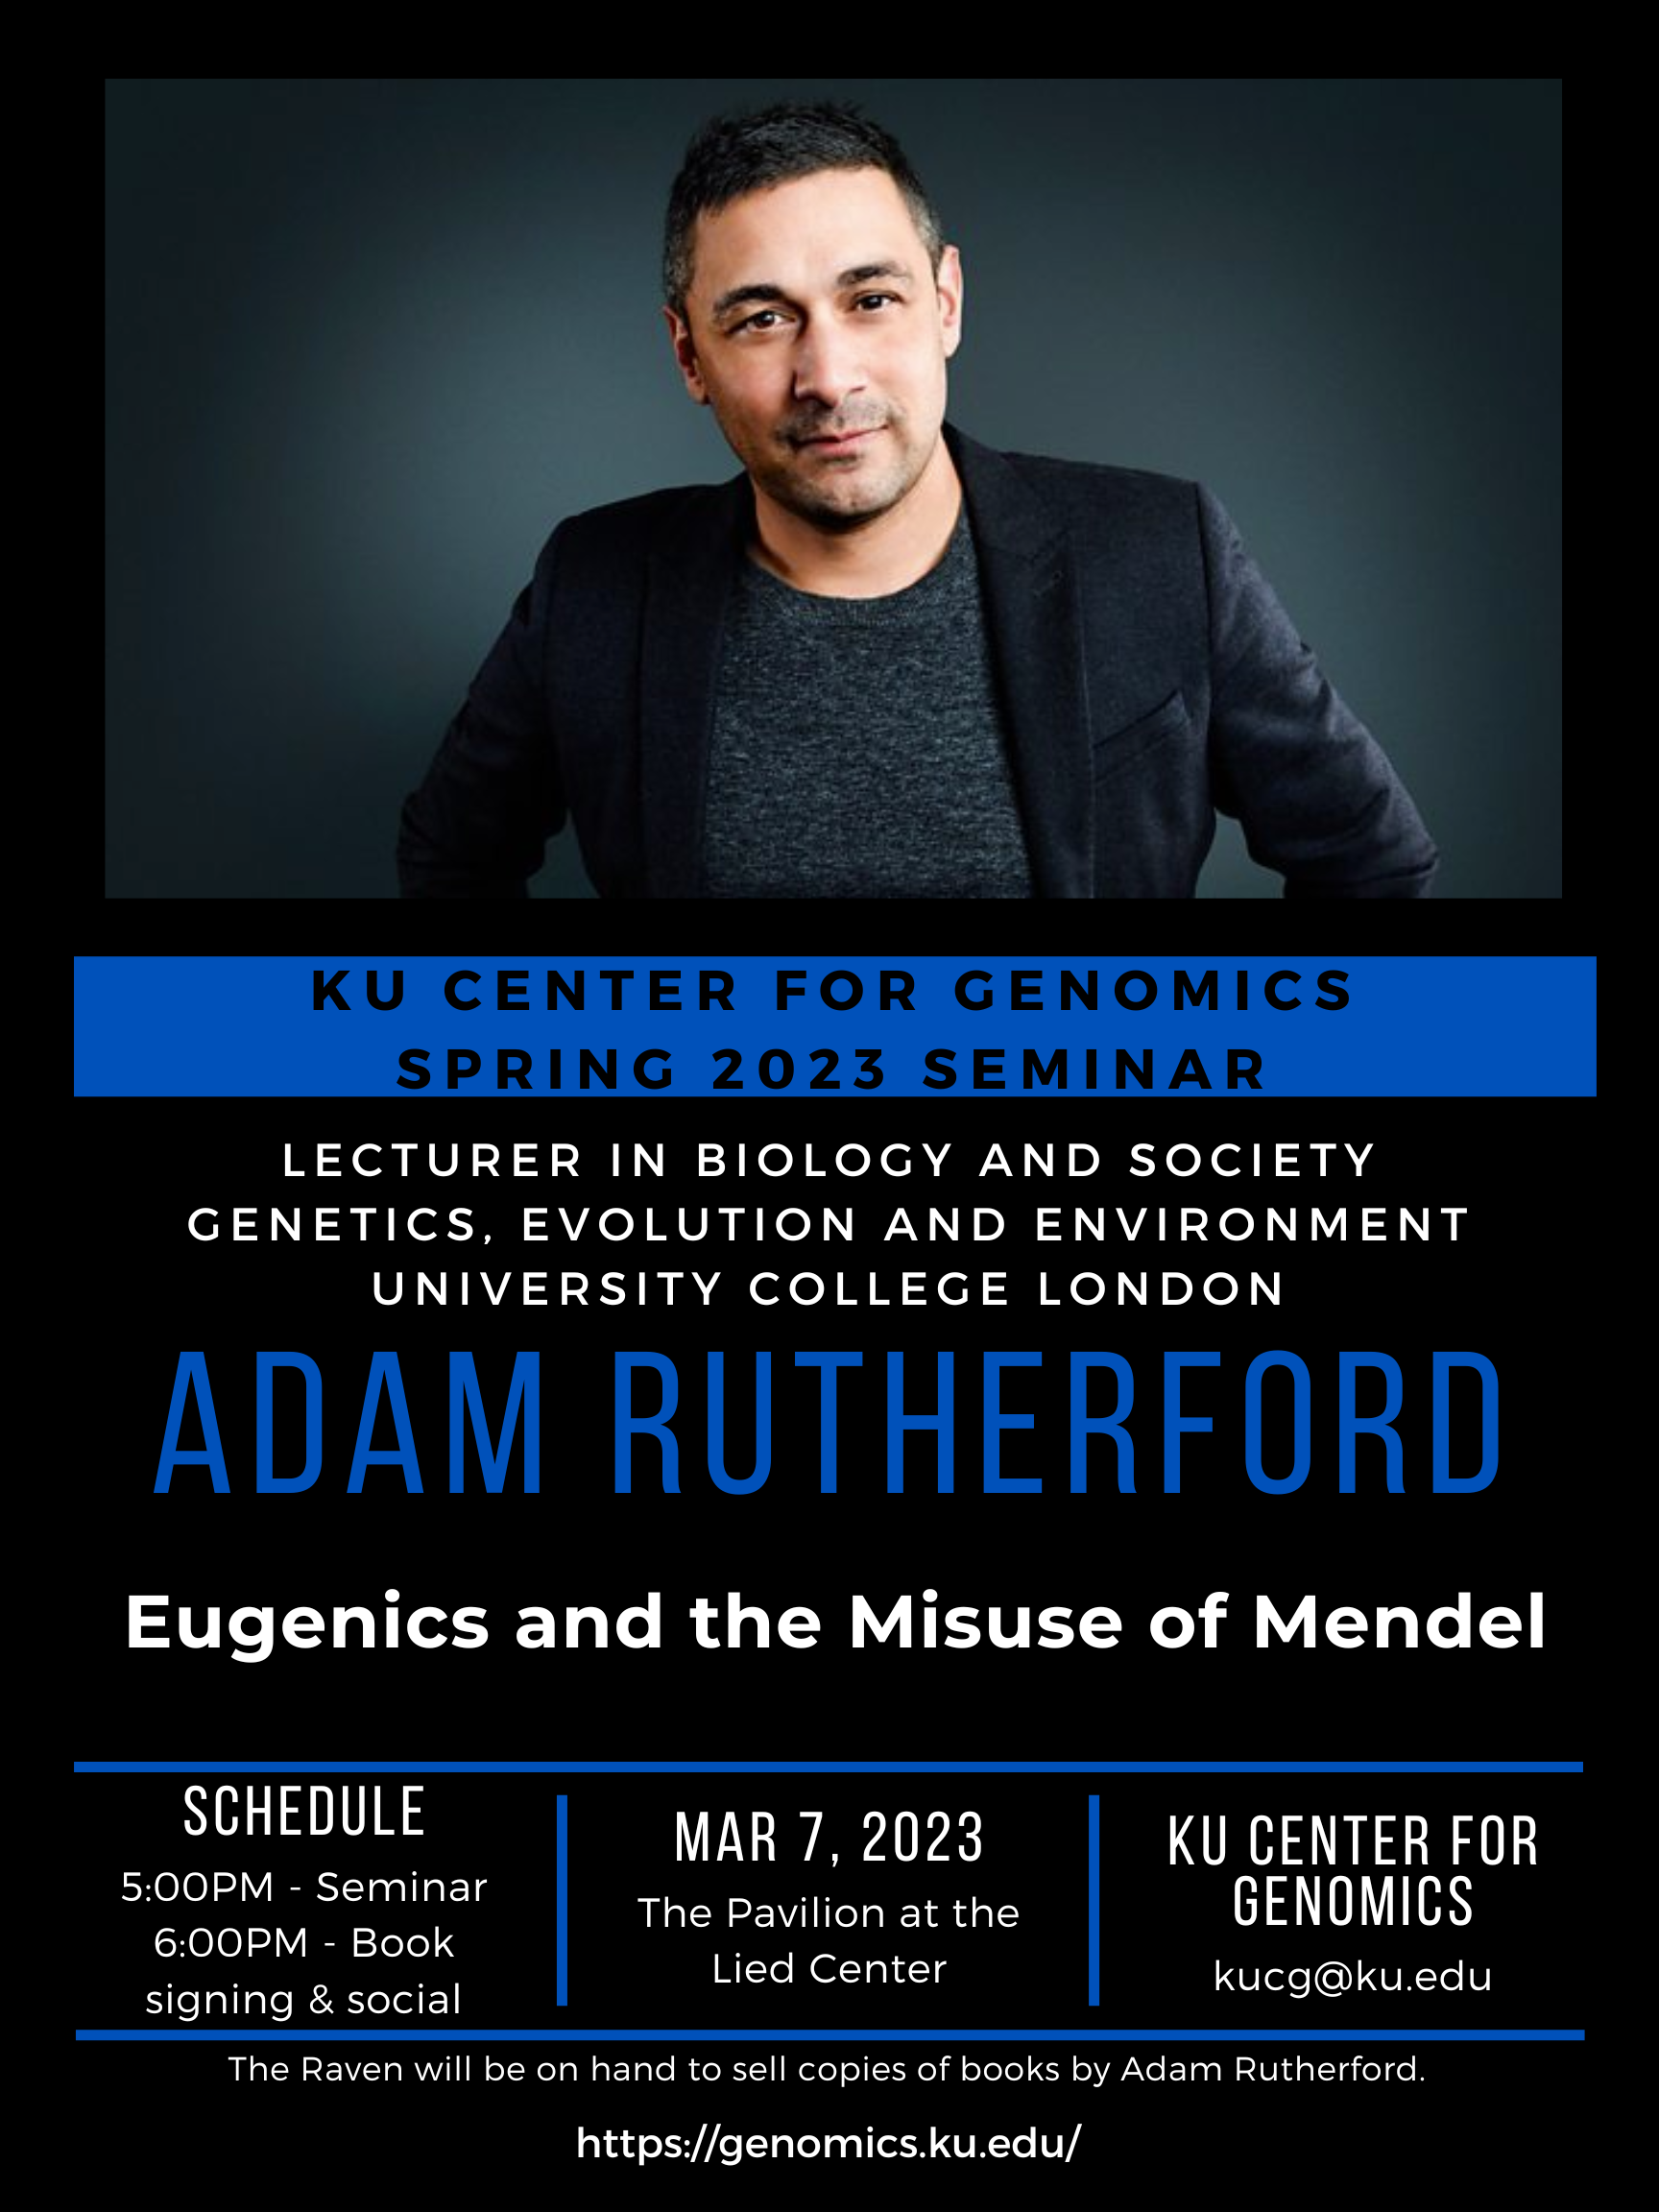 "Sping 2023 Seminar, Adam Rutherford, Eugenics and the Misuse of Mendel. March 7, 2023 at 5 p.m. at the Lied Center Pavilion"